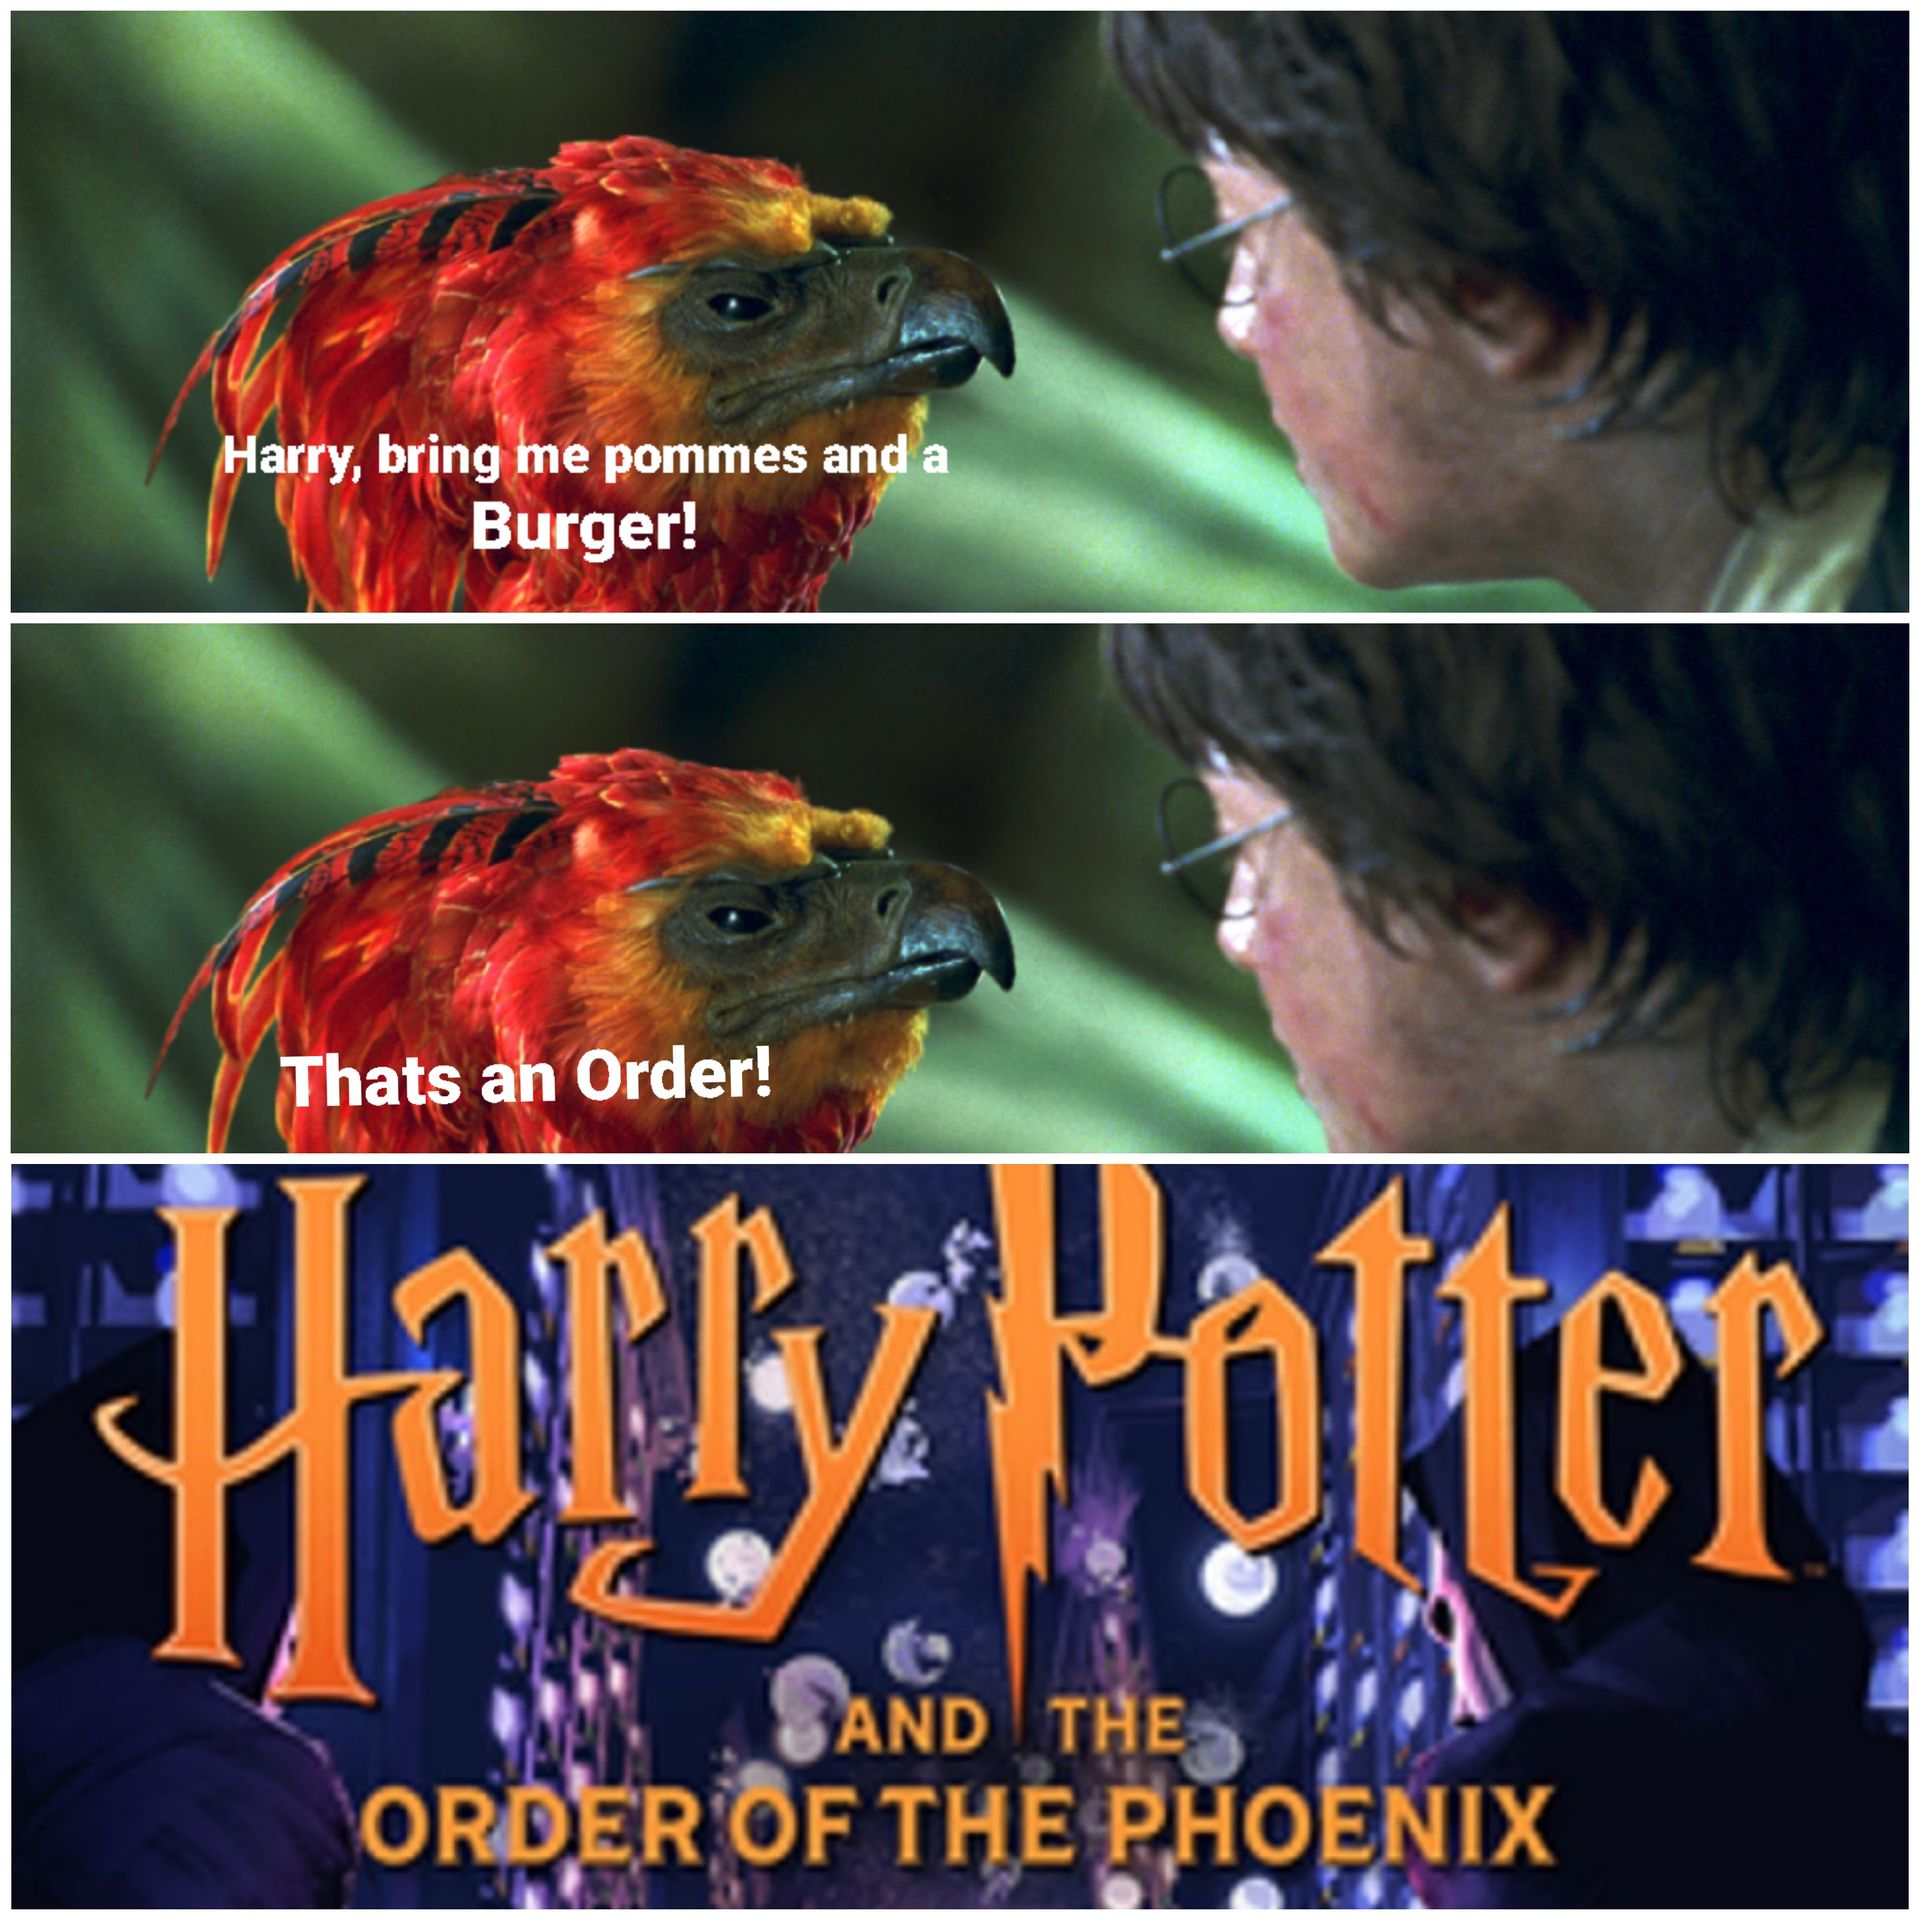 Harry, bring me pommes and a
Burger!
Thats an Order!
Harry Potter
SAND THE
ORDER OF THE PHOENIX